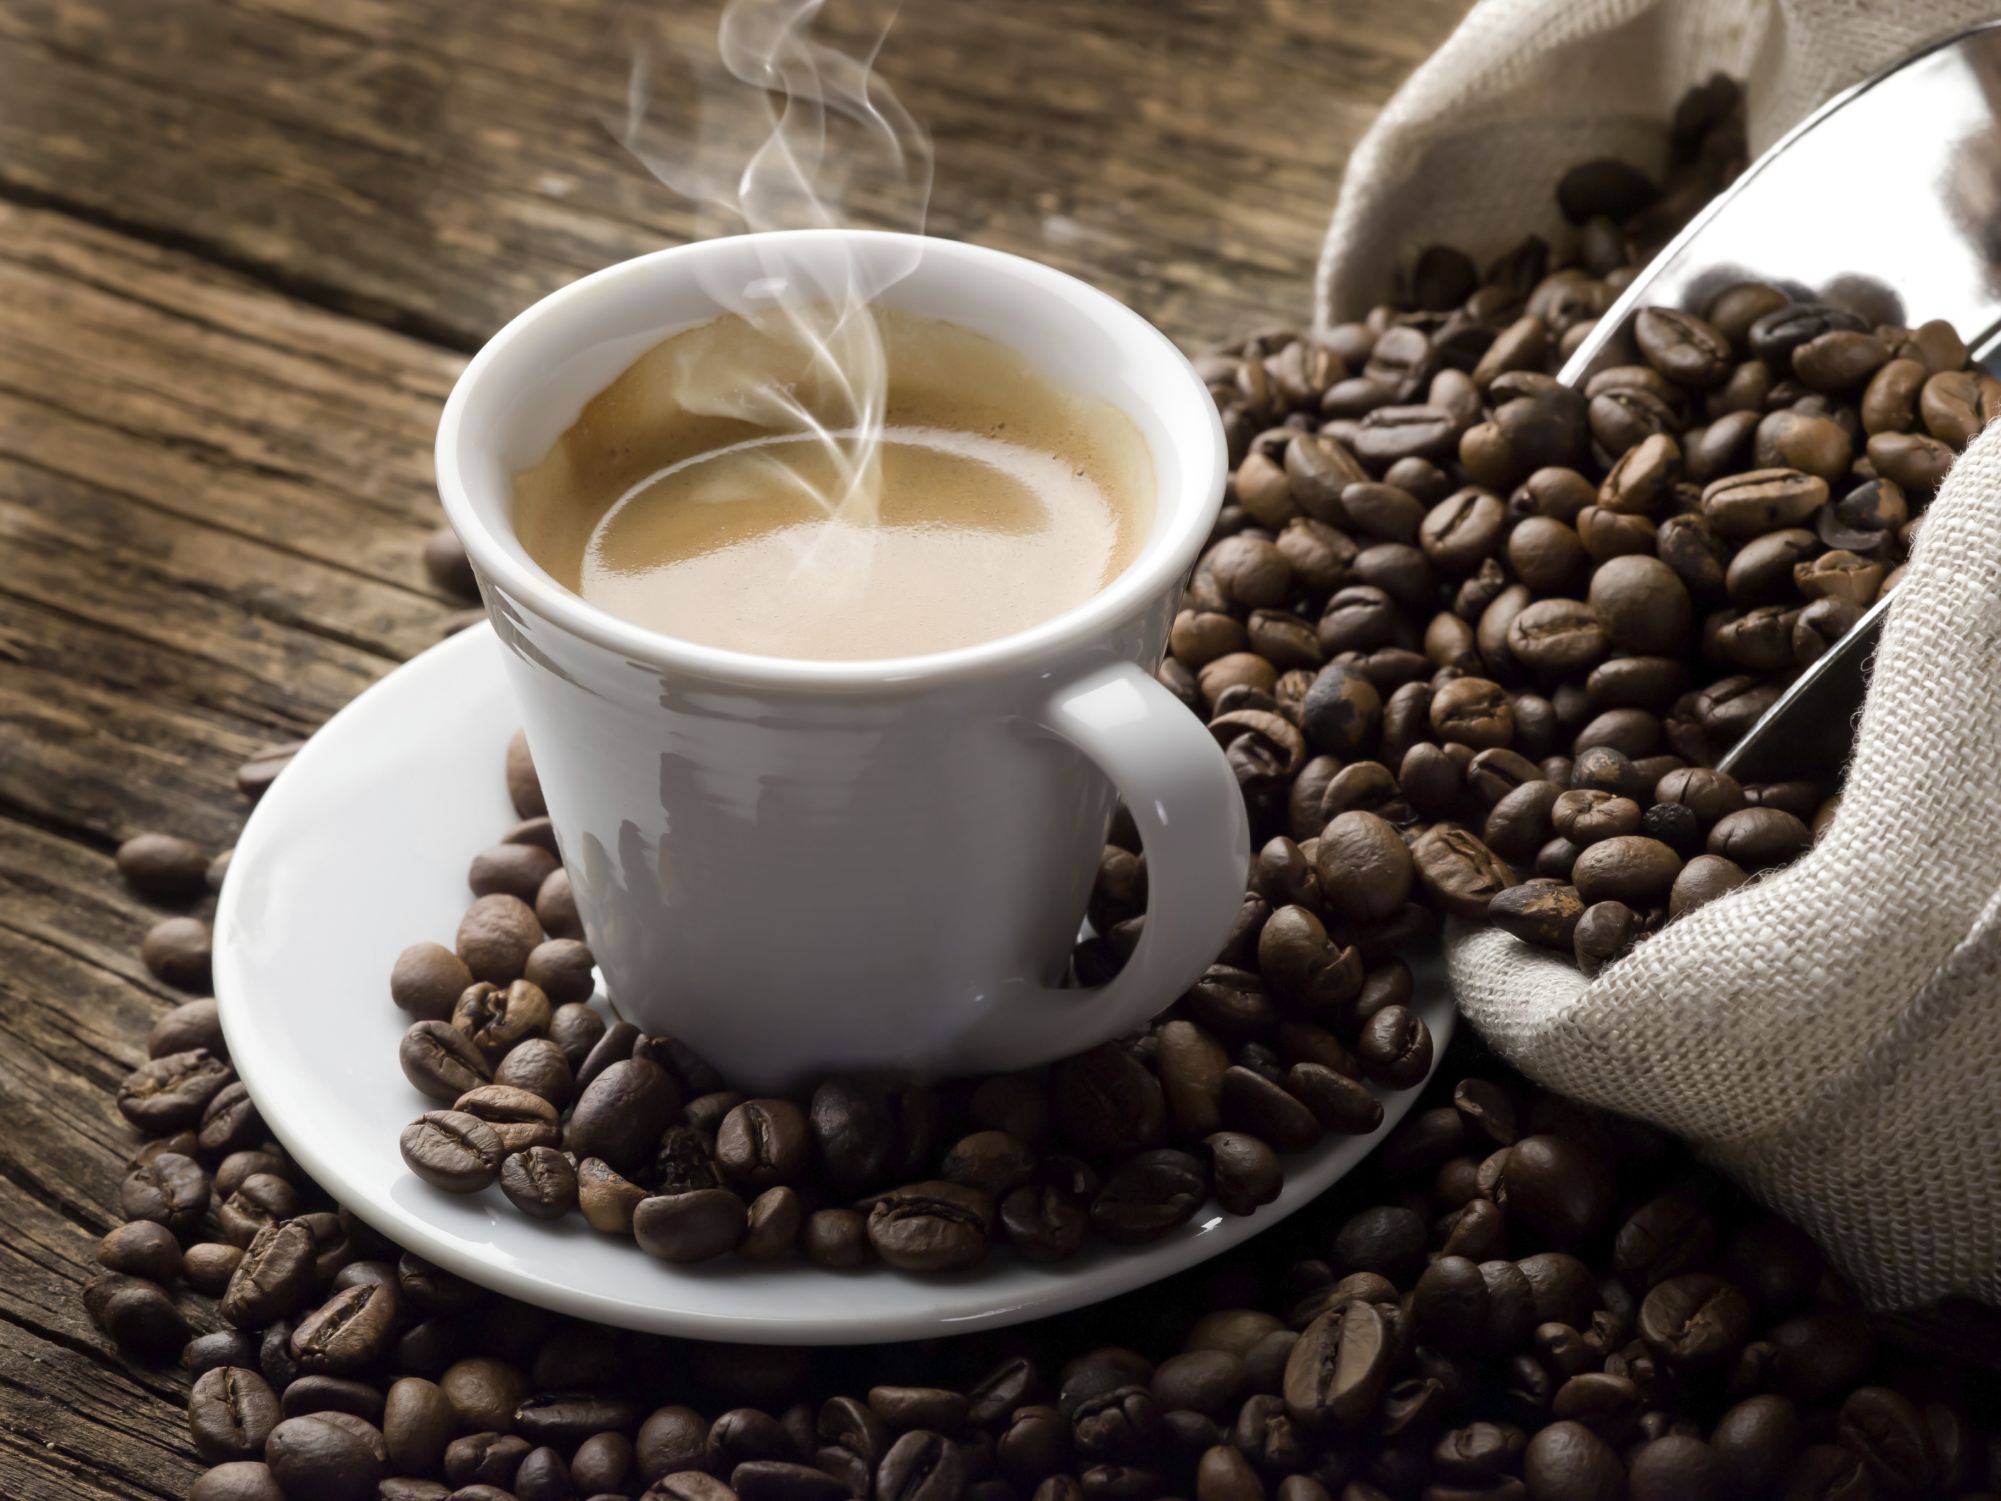 Drinking Coffee Could Help Protect Your DNA From Damage